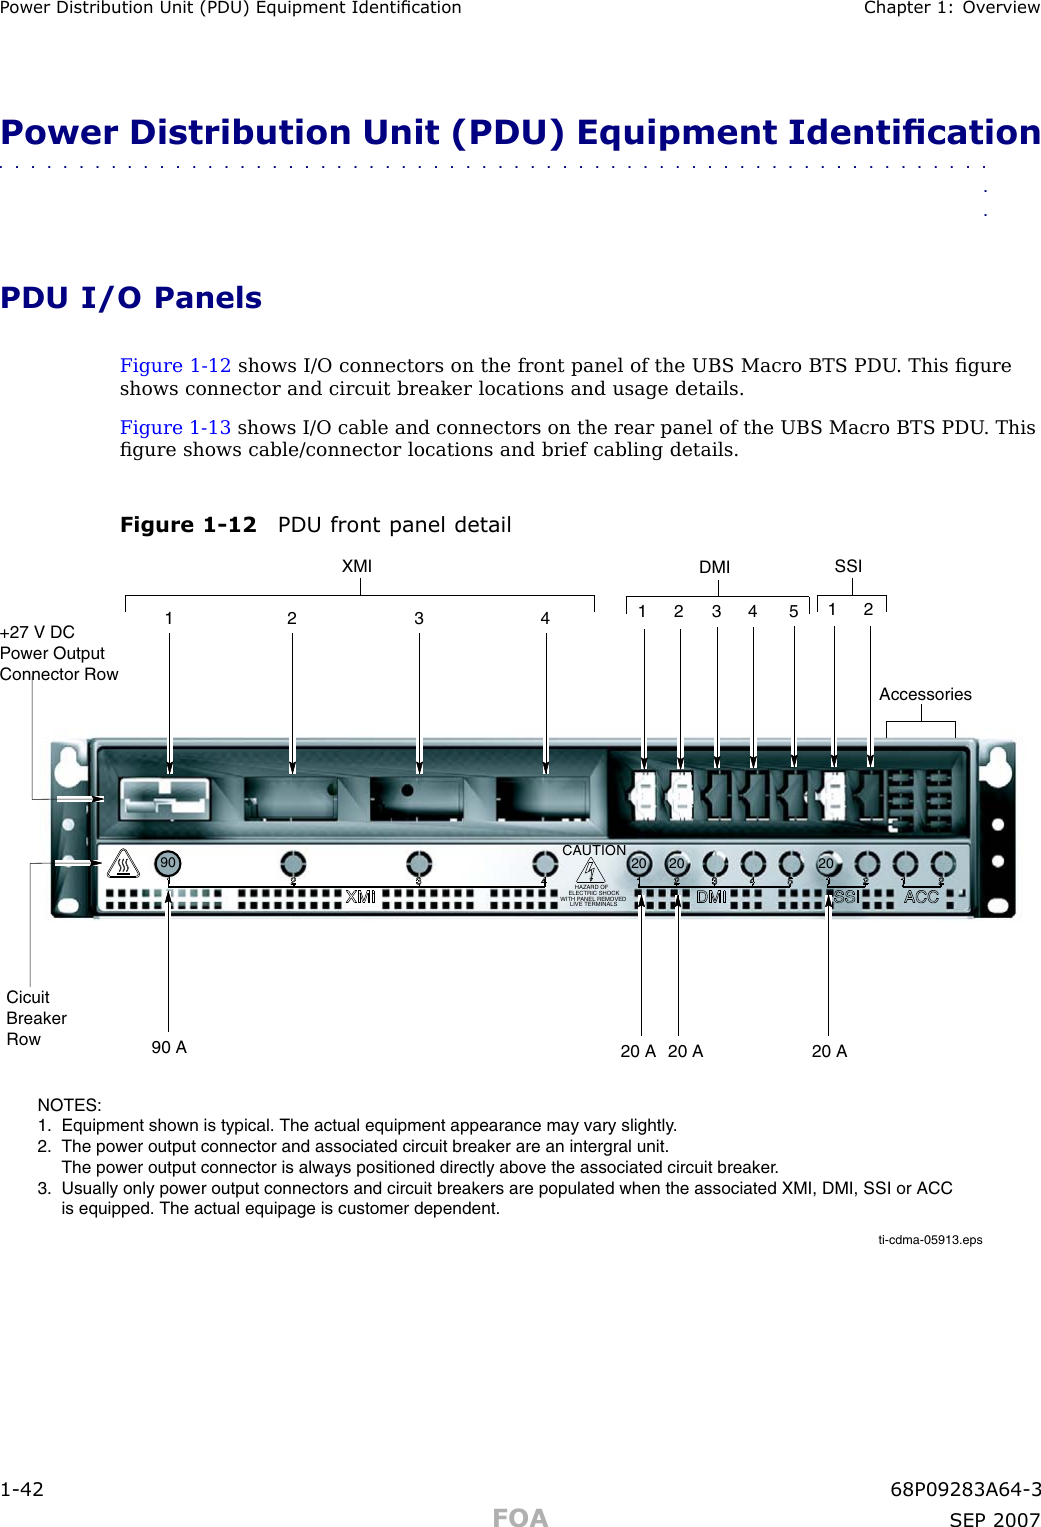 P ower Distribution Unit (PDU) Equipment Identication Chapter 1: Ov erviewPower Distribution Unit (PDU) Equipment Identication■■■■■■■■■■■■■■■■■■■■■■■■■■■■■■■■■■■■■■■■■■■■■■■■■■■■■■■■■■■■■■■■PDU I/O PanelsFigure 1 -12 shows I/O connectors on the front panel of the UBS Macro BTS PDU . This ﬁgureshows connector and circuit breaker locations and usage details.Figure 1 -13 shows I/O cable and connectors on the rear panel of the UBS Macro BTS PDU . Thisﬁgure shows cable/connector locations and brief cabling details.Figure 1 -12 PDU front panel detailti-cdma-05913.eps         HAZARD OF     ELECTRIC SHOCKWITH PANEL REMOVED      LIVE TERMINALSCAUTION 20 20 2090+27 V DC Power Output Connector RowNOTES:1.  Equipment shown is typical. The actual equipment appearance may vary slightly.2.  The power output connector and associated circuit breaker are an intergral unit.      The power output connector is always positioned directly above the associated circuit breaker.3.  Usually only power output connectors and circuit breakers are populated when the associated XMI, DMI, SSI or ACC      is equipped. The actual equipage is customer dependent. Cicuit Breaker Row 90 A11 232 4520 A 20 A 20 AXMI SSIAccessories1 2DMI3 41 -42 68P09283A64 -3FOA SEP 2007